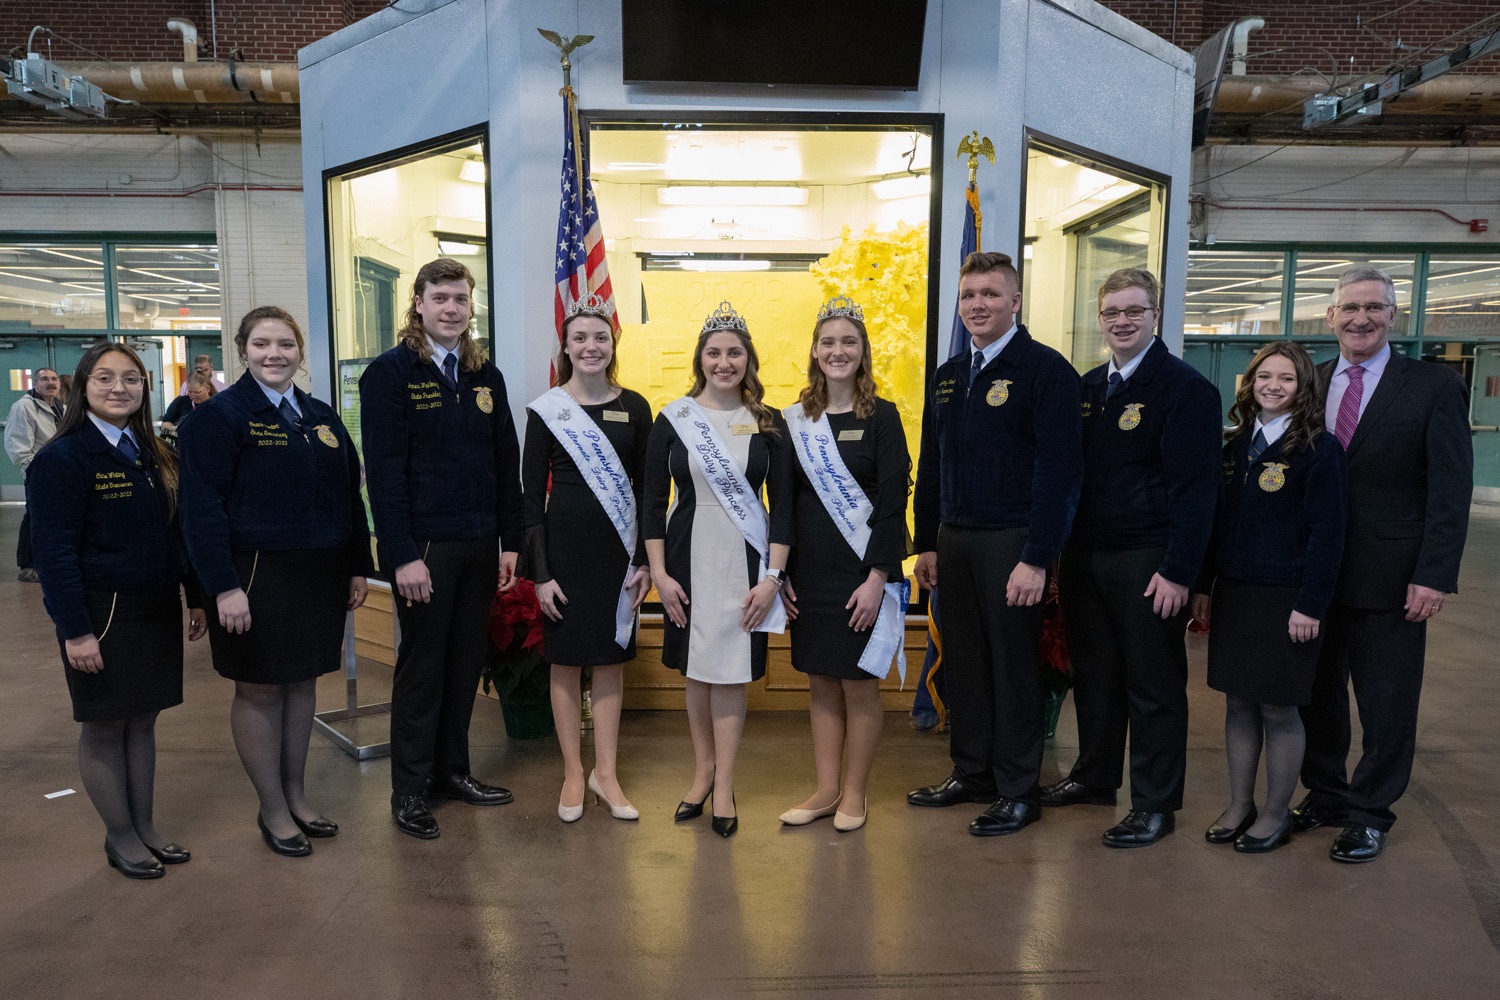 FFA, PA Dairy Princesses Natalie Grumbine, Selina Horst, and Darcy Heltzel, and Secretary of Agriculture Russell Redding<br><a href="https://filesource.amperwave.net/commonwealthofpa/photo/22383_Ag_ButterSculpture_ED_38.jpg" target="_blank">⇣ Download Photo</a>